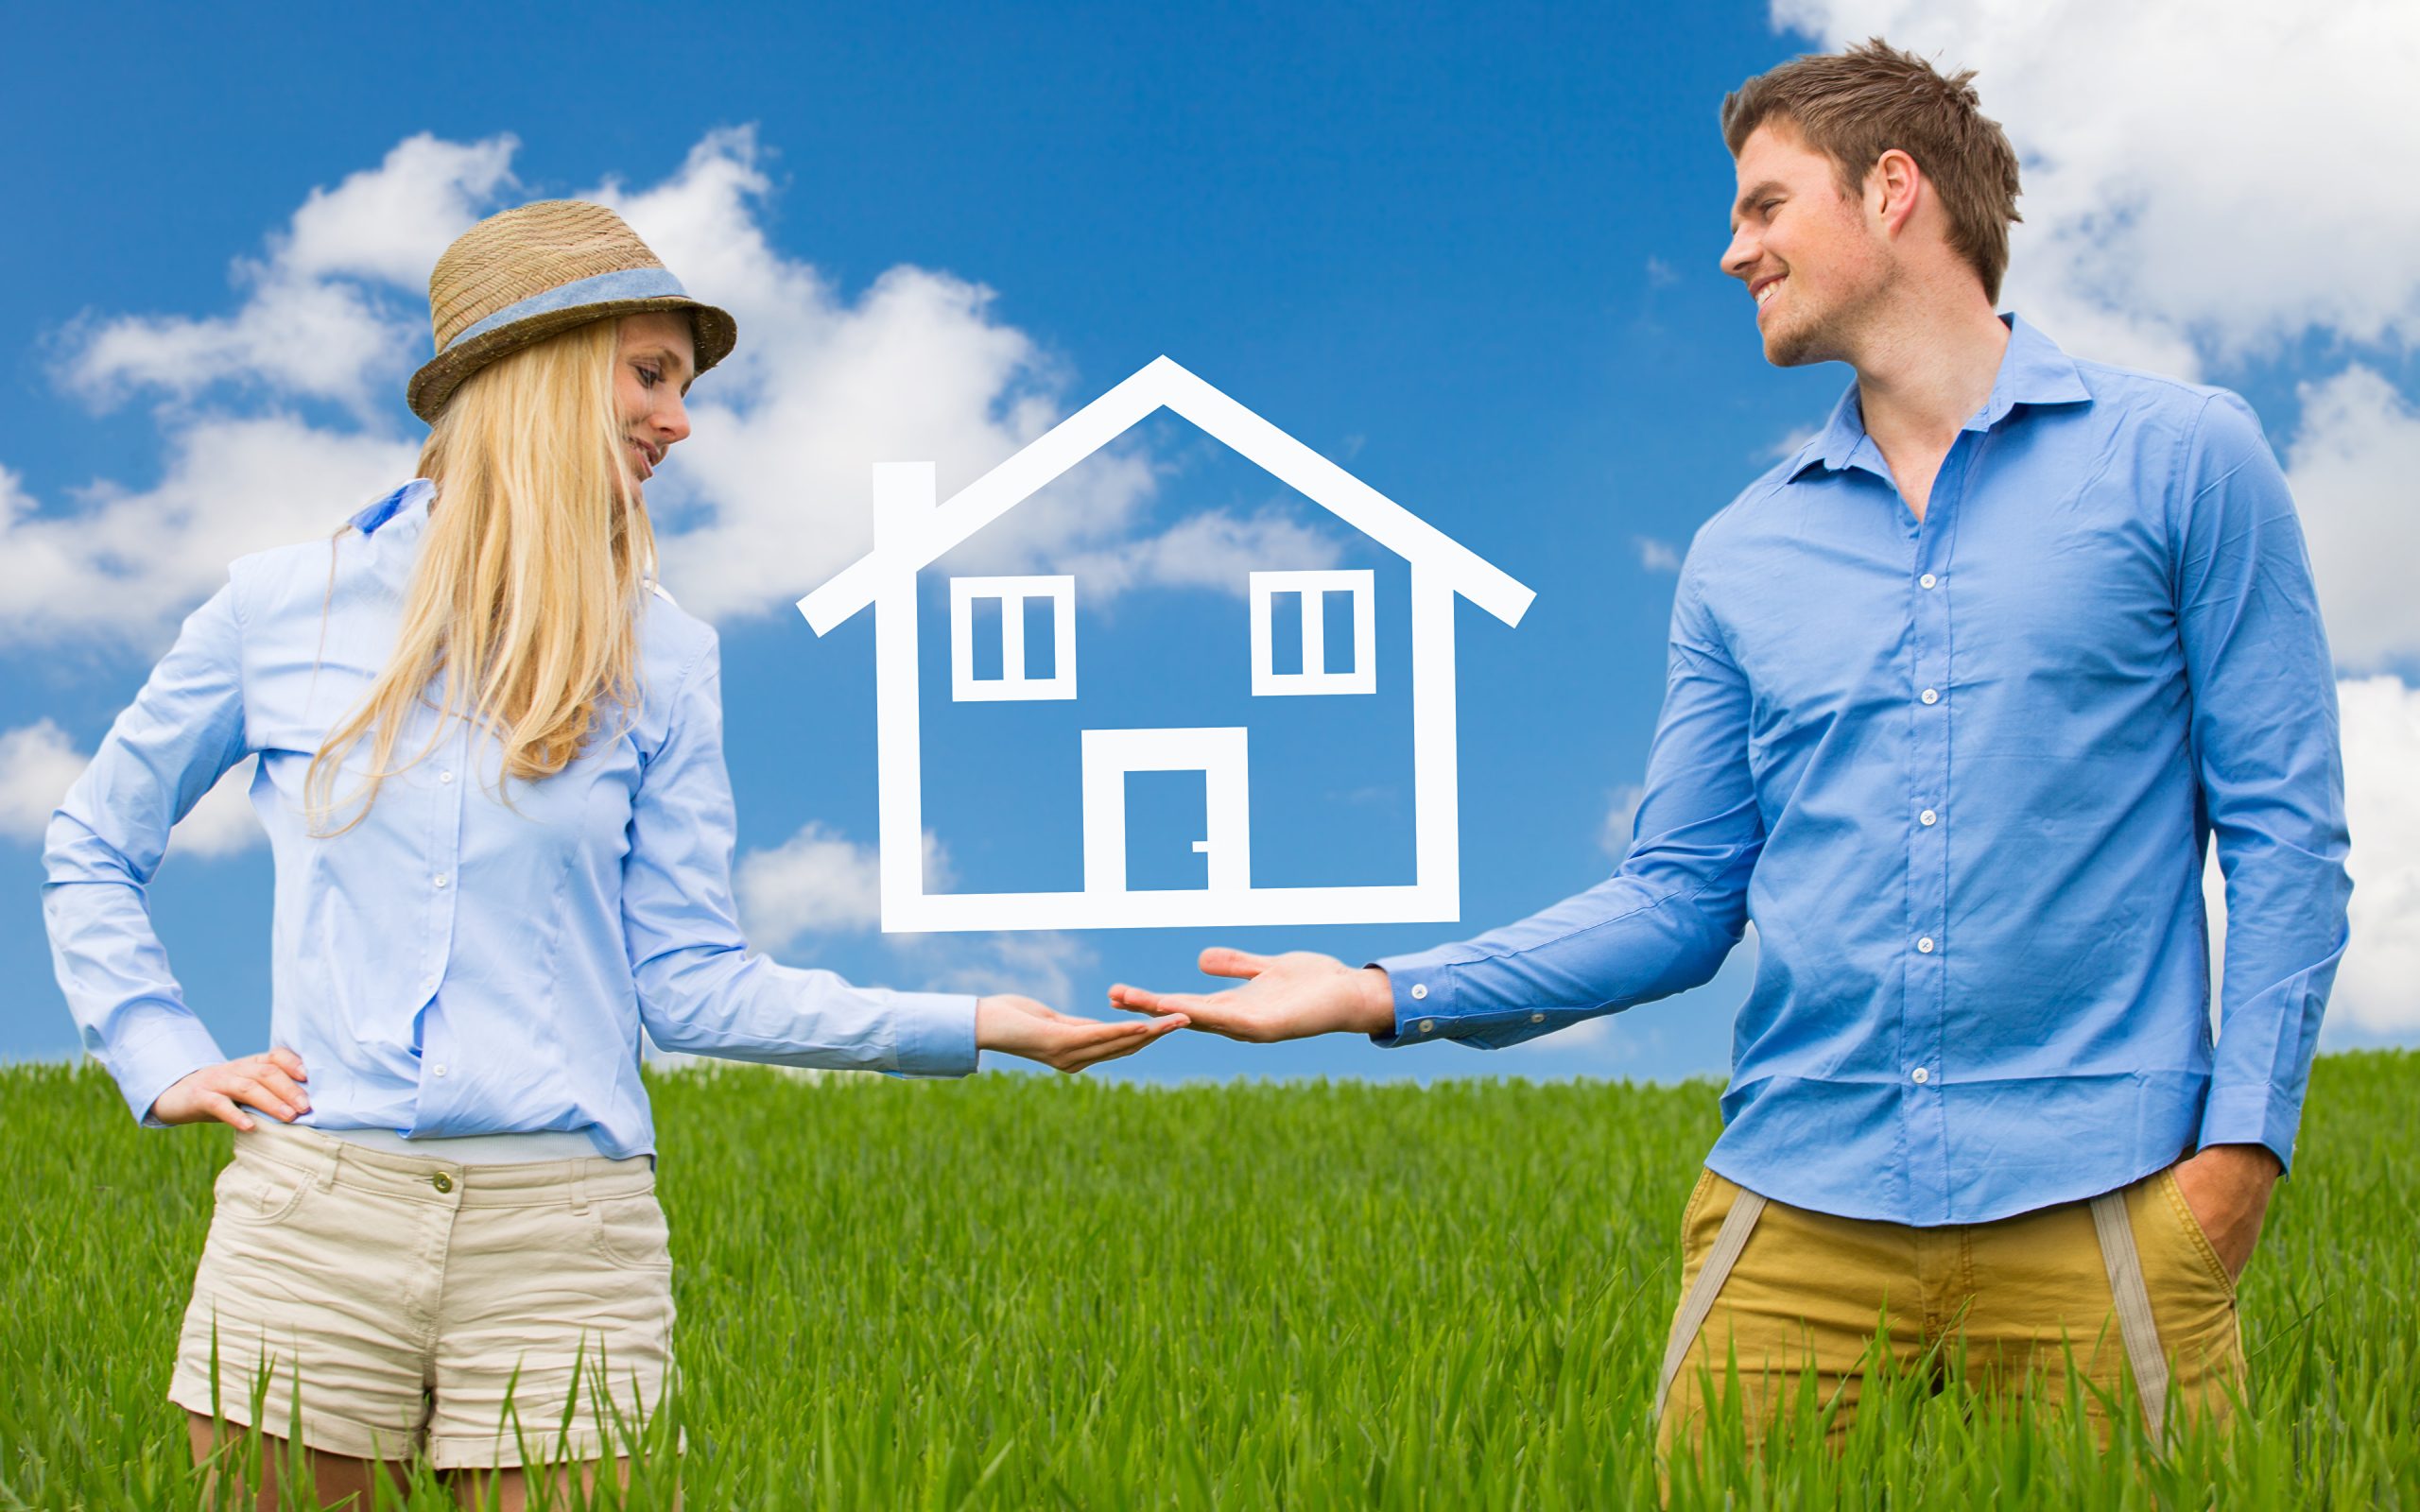 Real Estate Agent vs. Mortgage Broker: What's the Difference? 